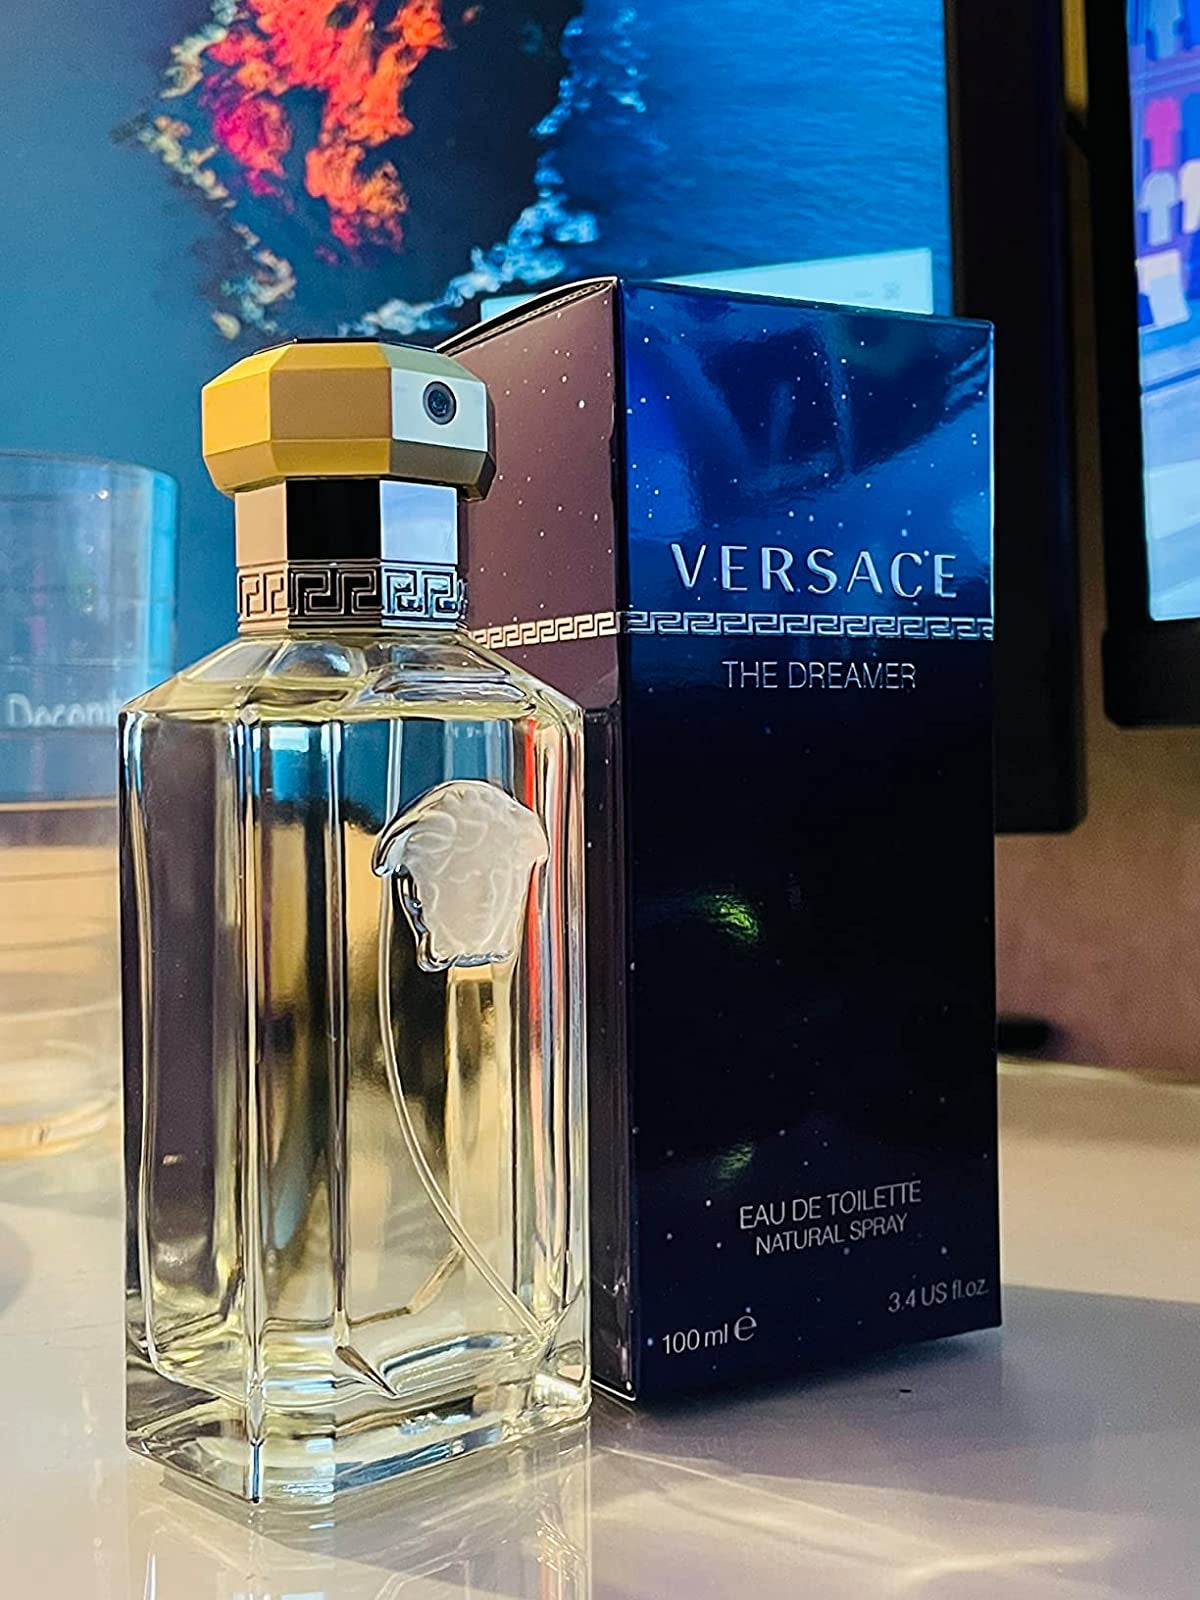 reviewers Versace cologne next to the box